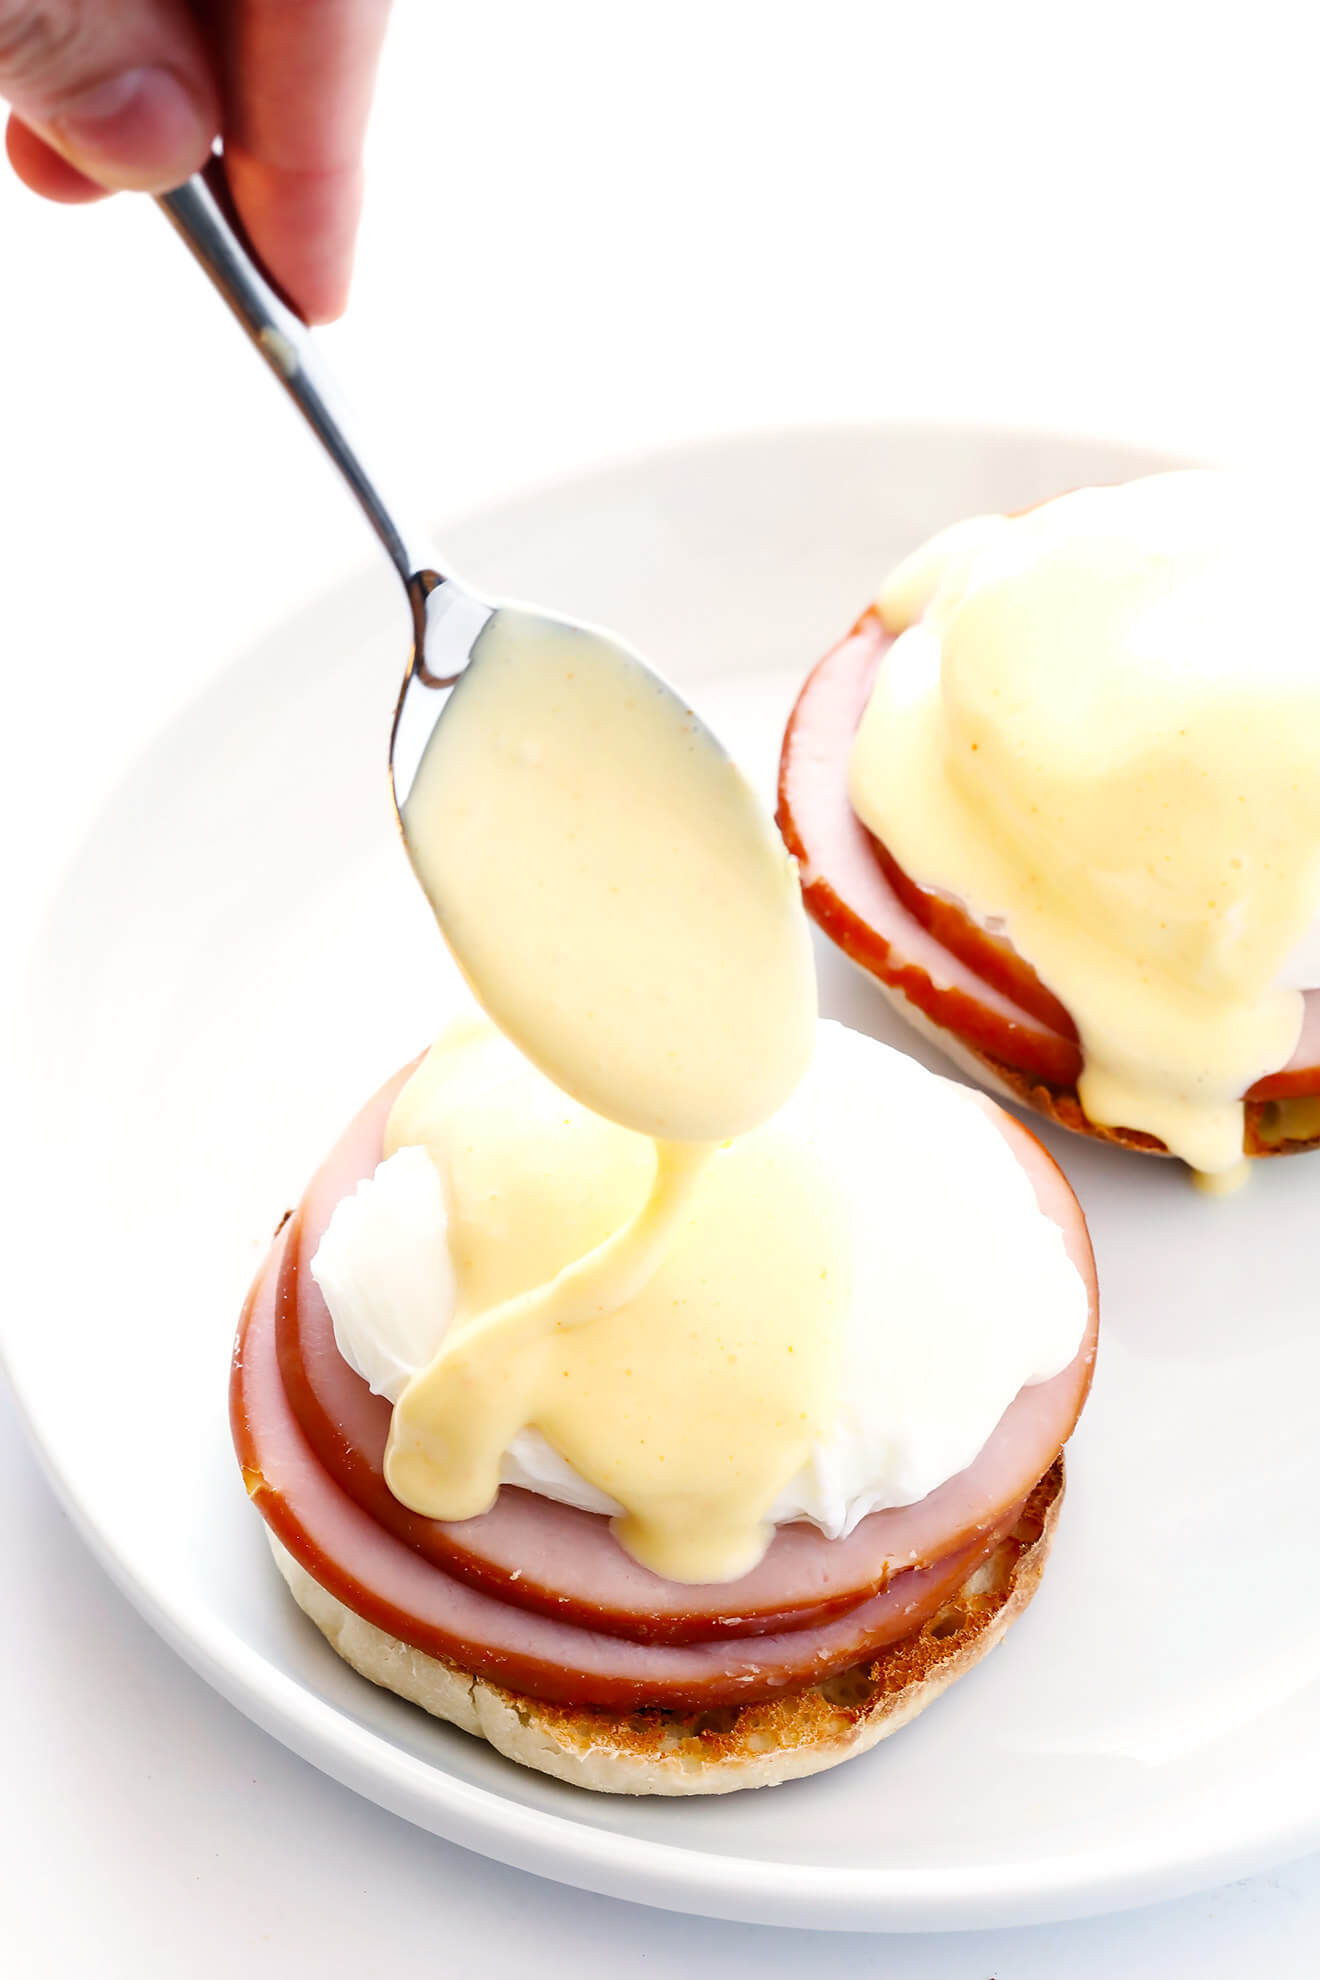 Learn how to make classic Eggs Benedict with this easy recipe. So delicious, and perfect for brunch. | gimmesomeoven.com